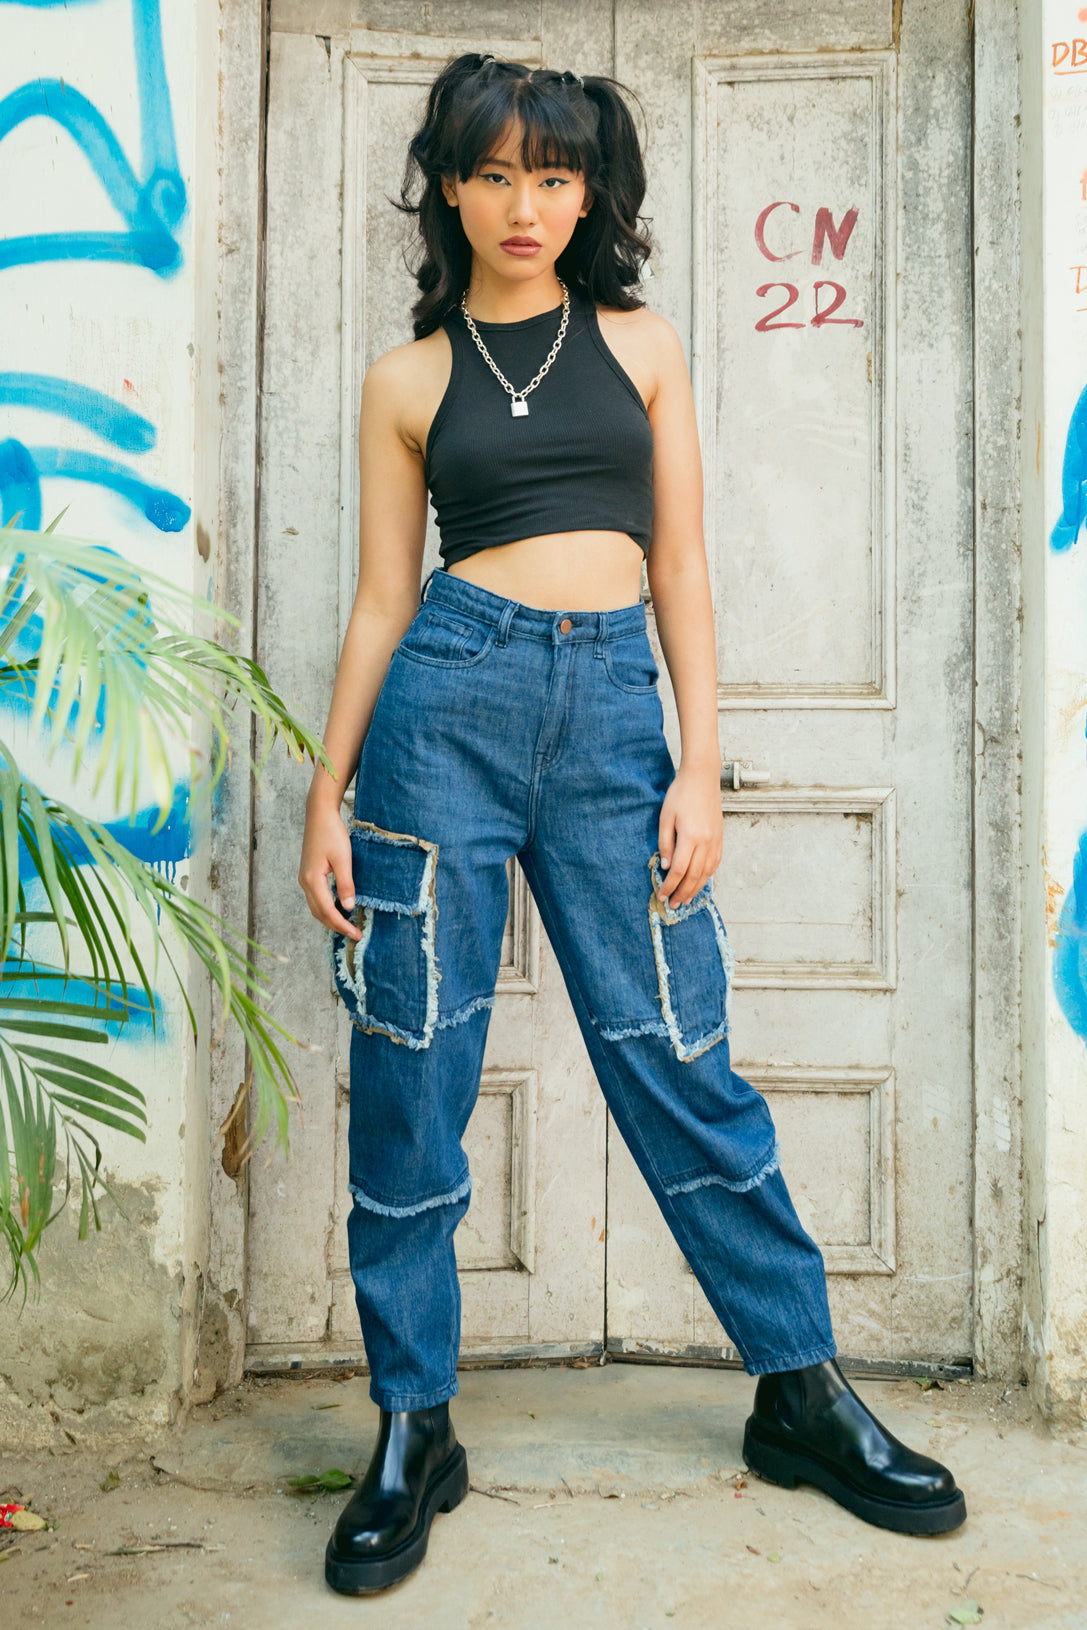 Shop Baggy Jeans for Women Online Starting @